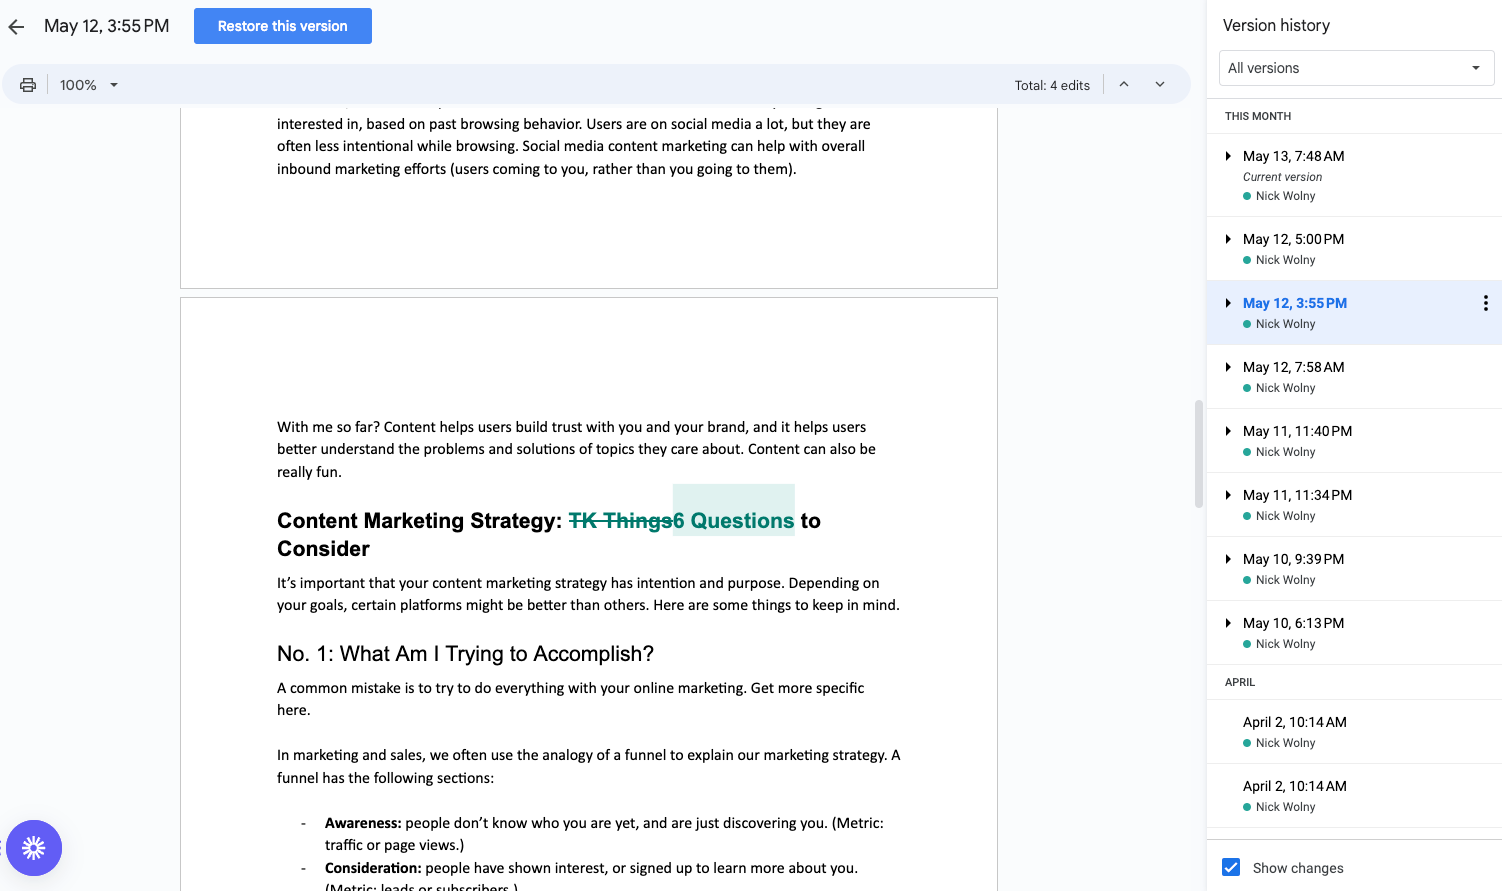 screenshot of the google docs track changes feature